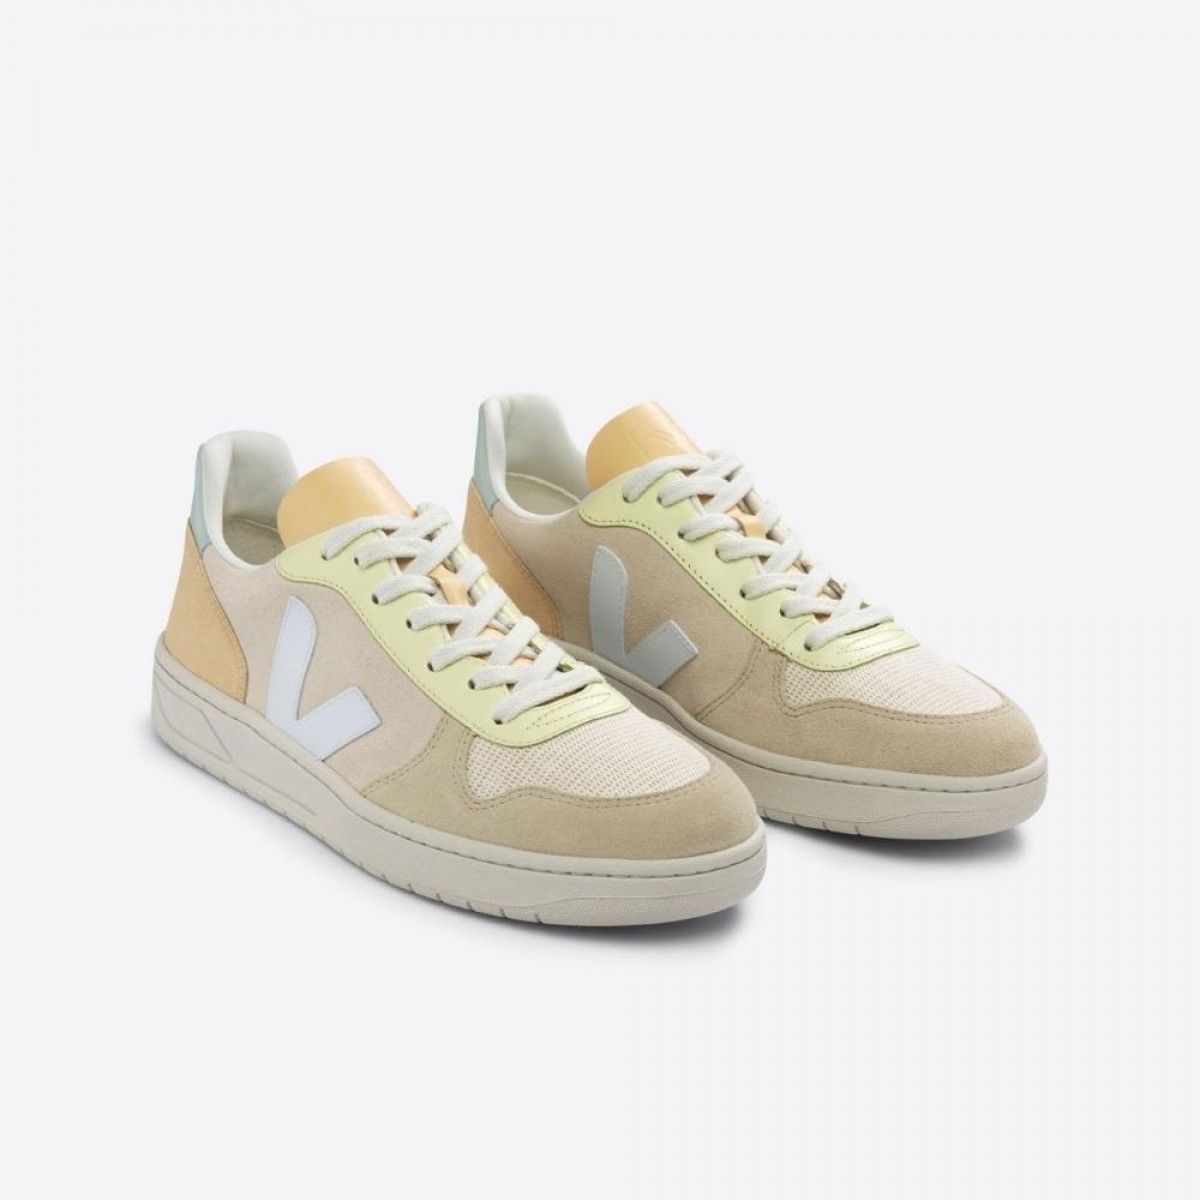 v-10 suede sneakers - sable menthol multico - front